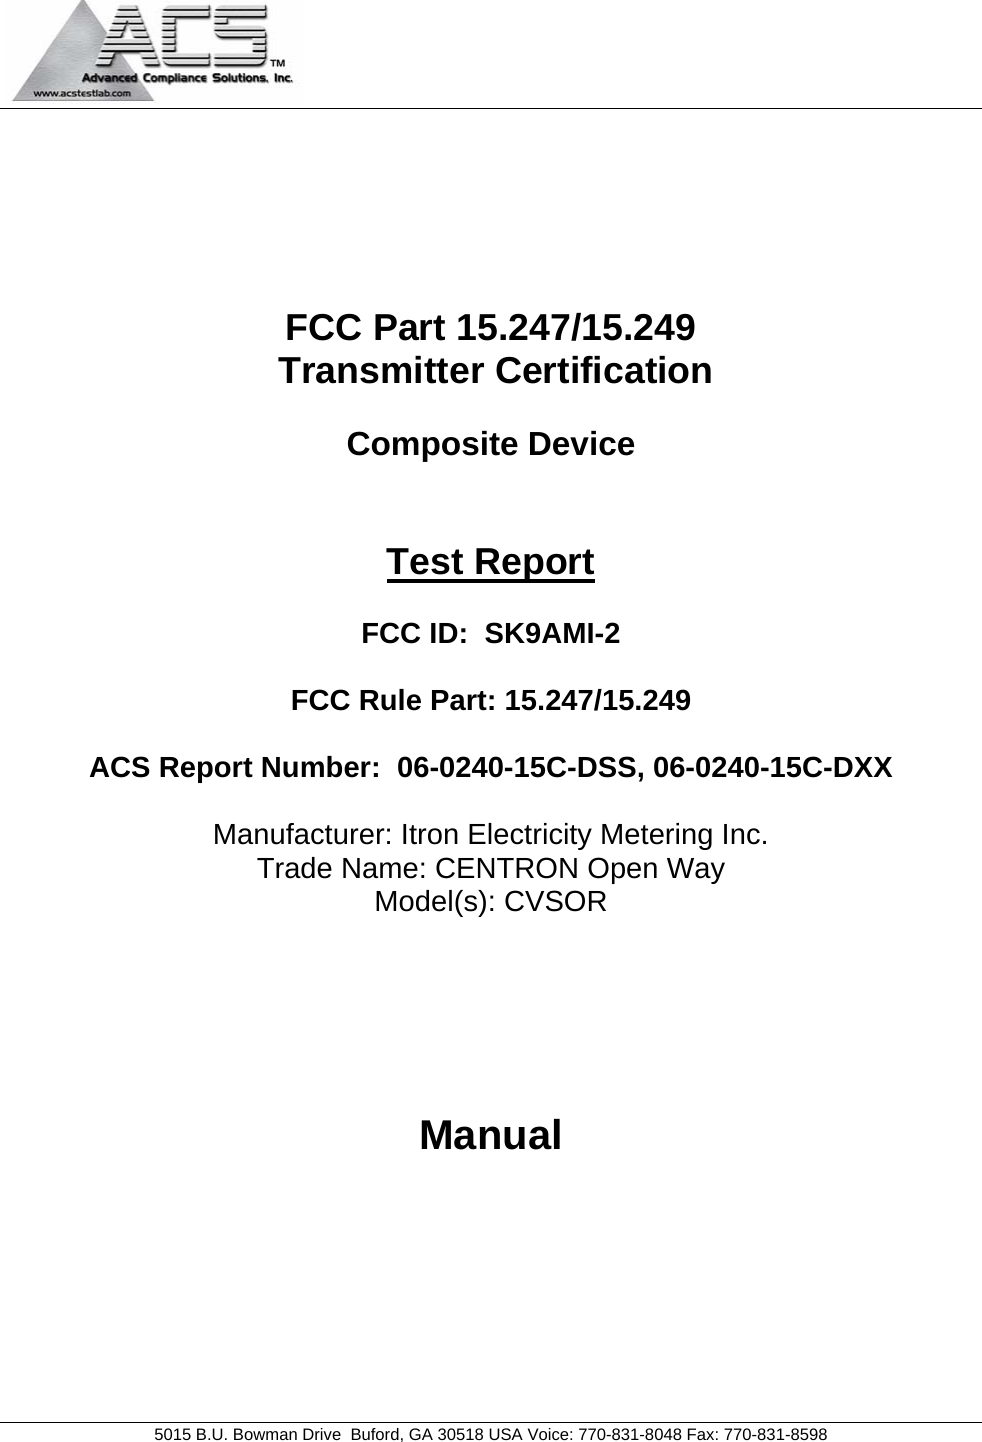                                            5015 B.U. Bowman Drive  Buford, GA 30518 USA Voice: 770-831-8048 Fax: 770-831-8598       FCC Part 15.247/15.249  Transmitter Certification  Composite Device   Test Report  FCC ID:  SK9AMI-2   FCC Rule Part: 15.247/15.249  ACS Report Number:  06-0240-15C-DSS, 06-0240-15C-DXX   Manufacturer: Itron Electricity Metering Inc. Trade Name: CENTRON Open Way Model(s): CVSOR     Manual  